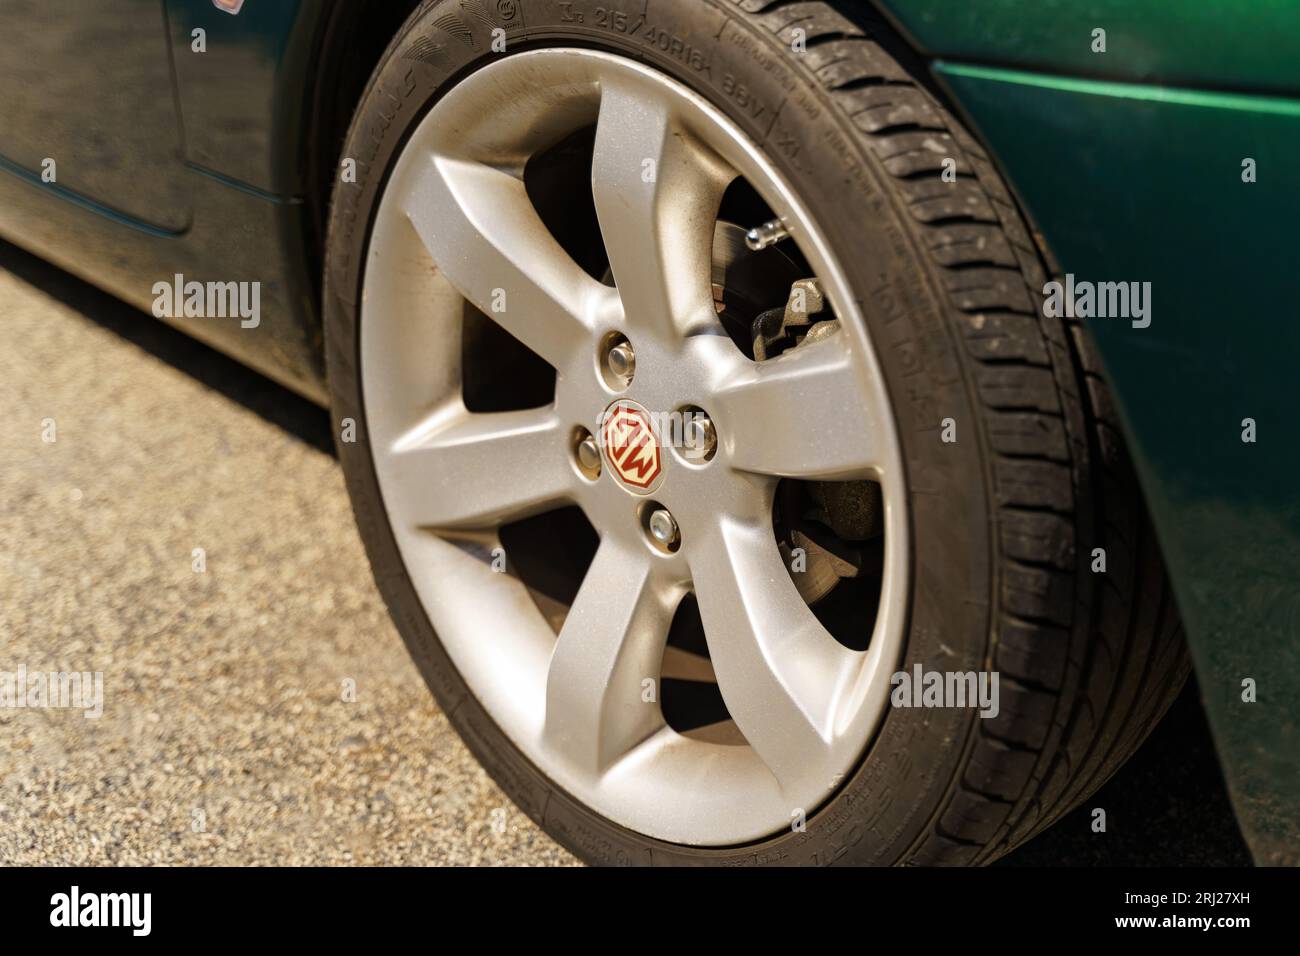 Langeac, France - May 27, 2023: MG MGF green sports car at the classic car show. View of the chrome wheels with the logo. Stock Photo